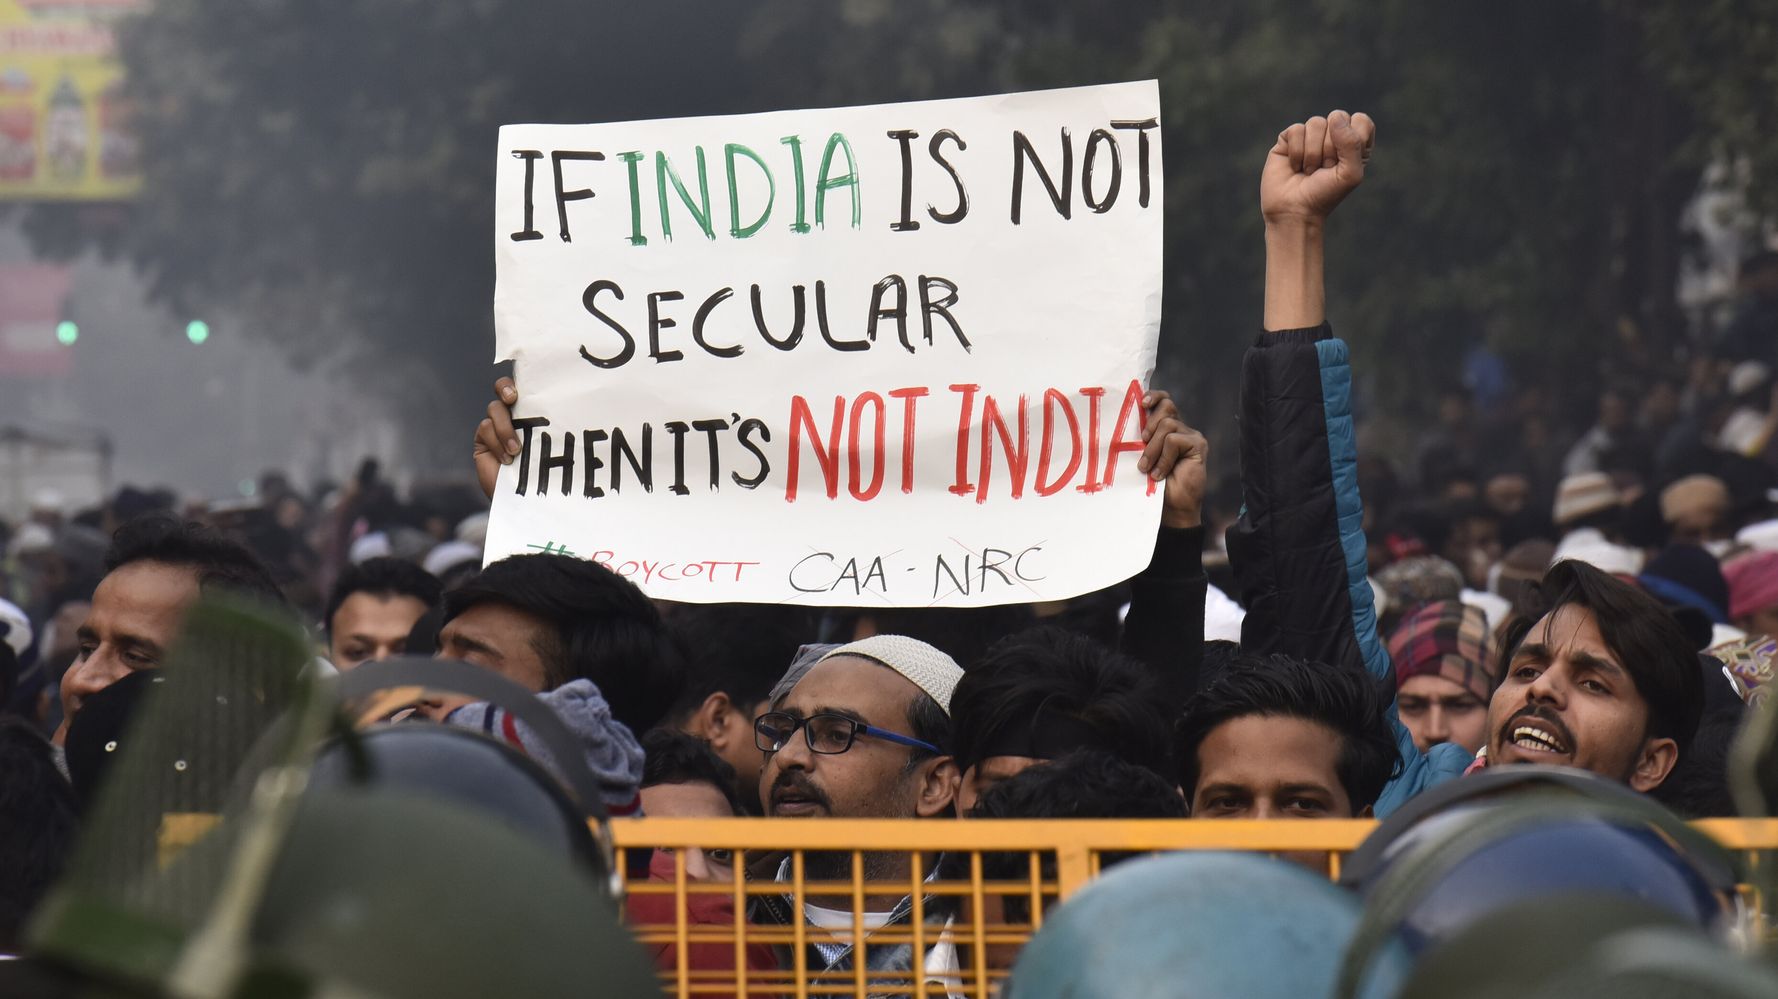 Why The US Religious Freedom Report Is Bad News For India | HuffPost none